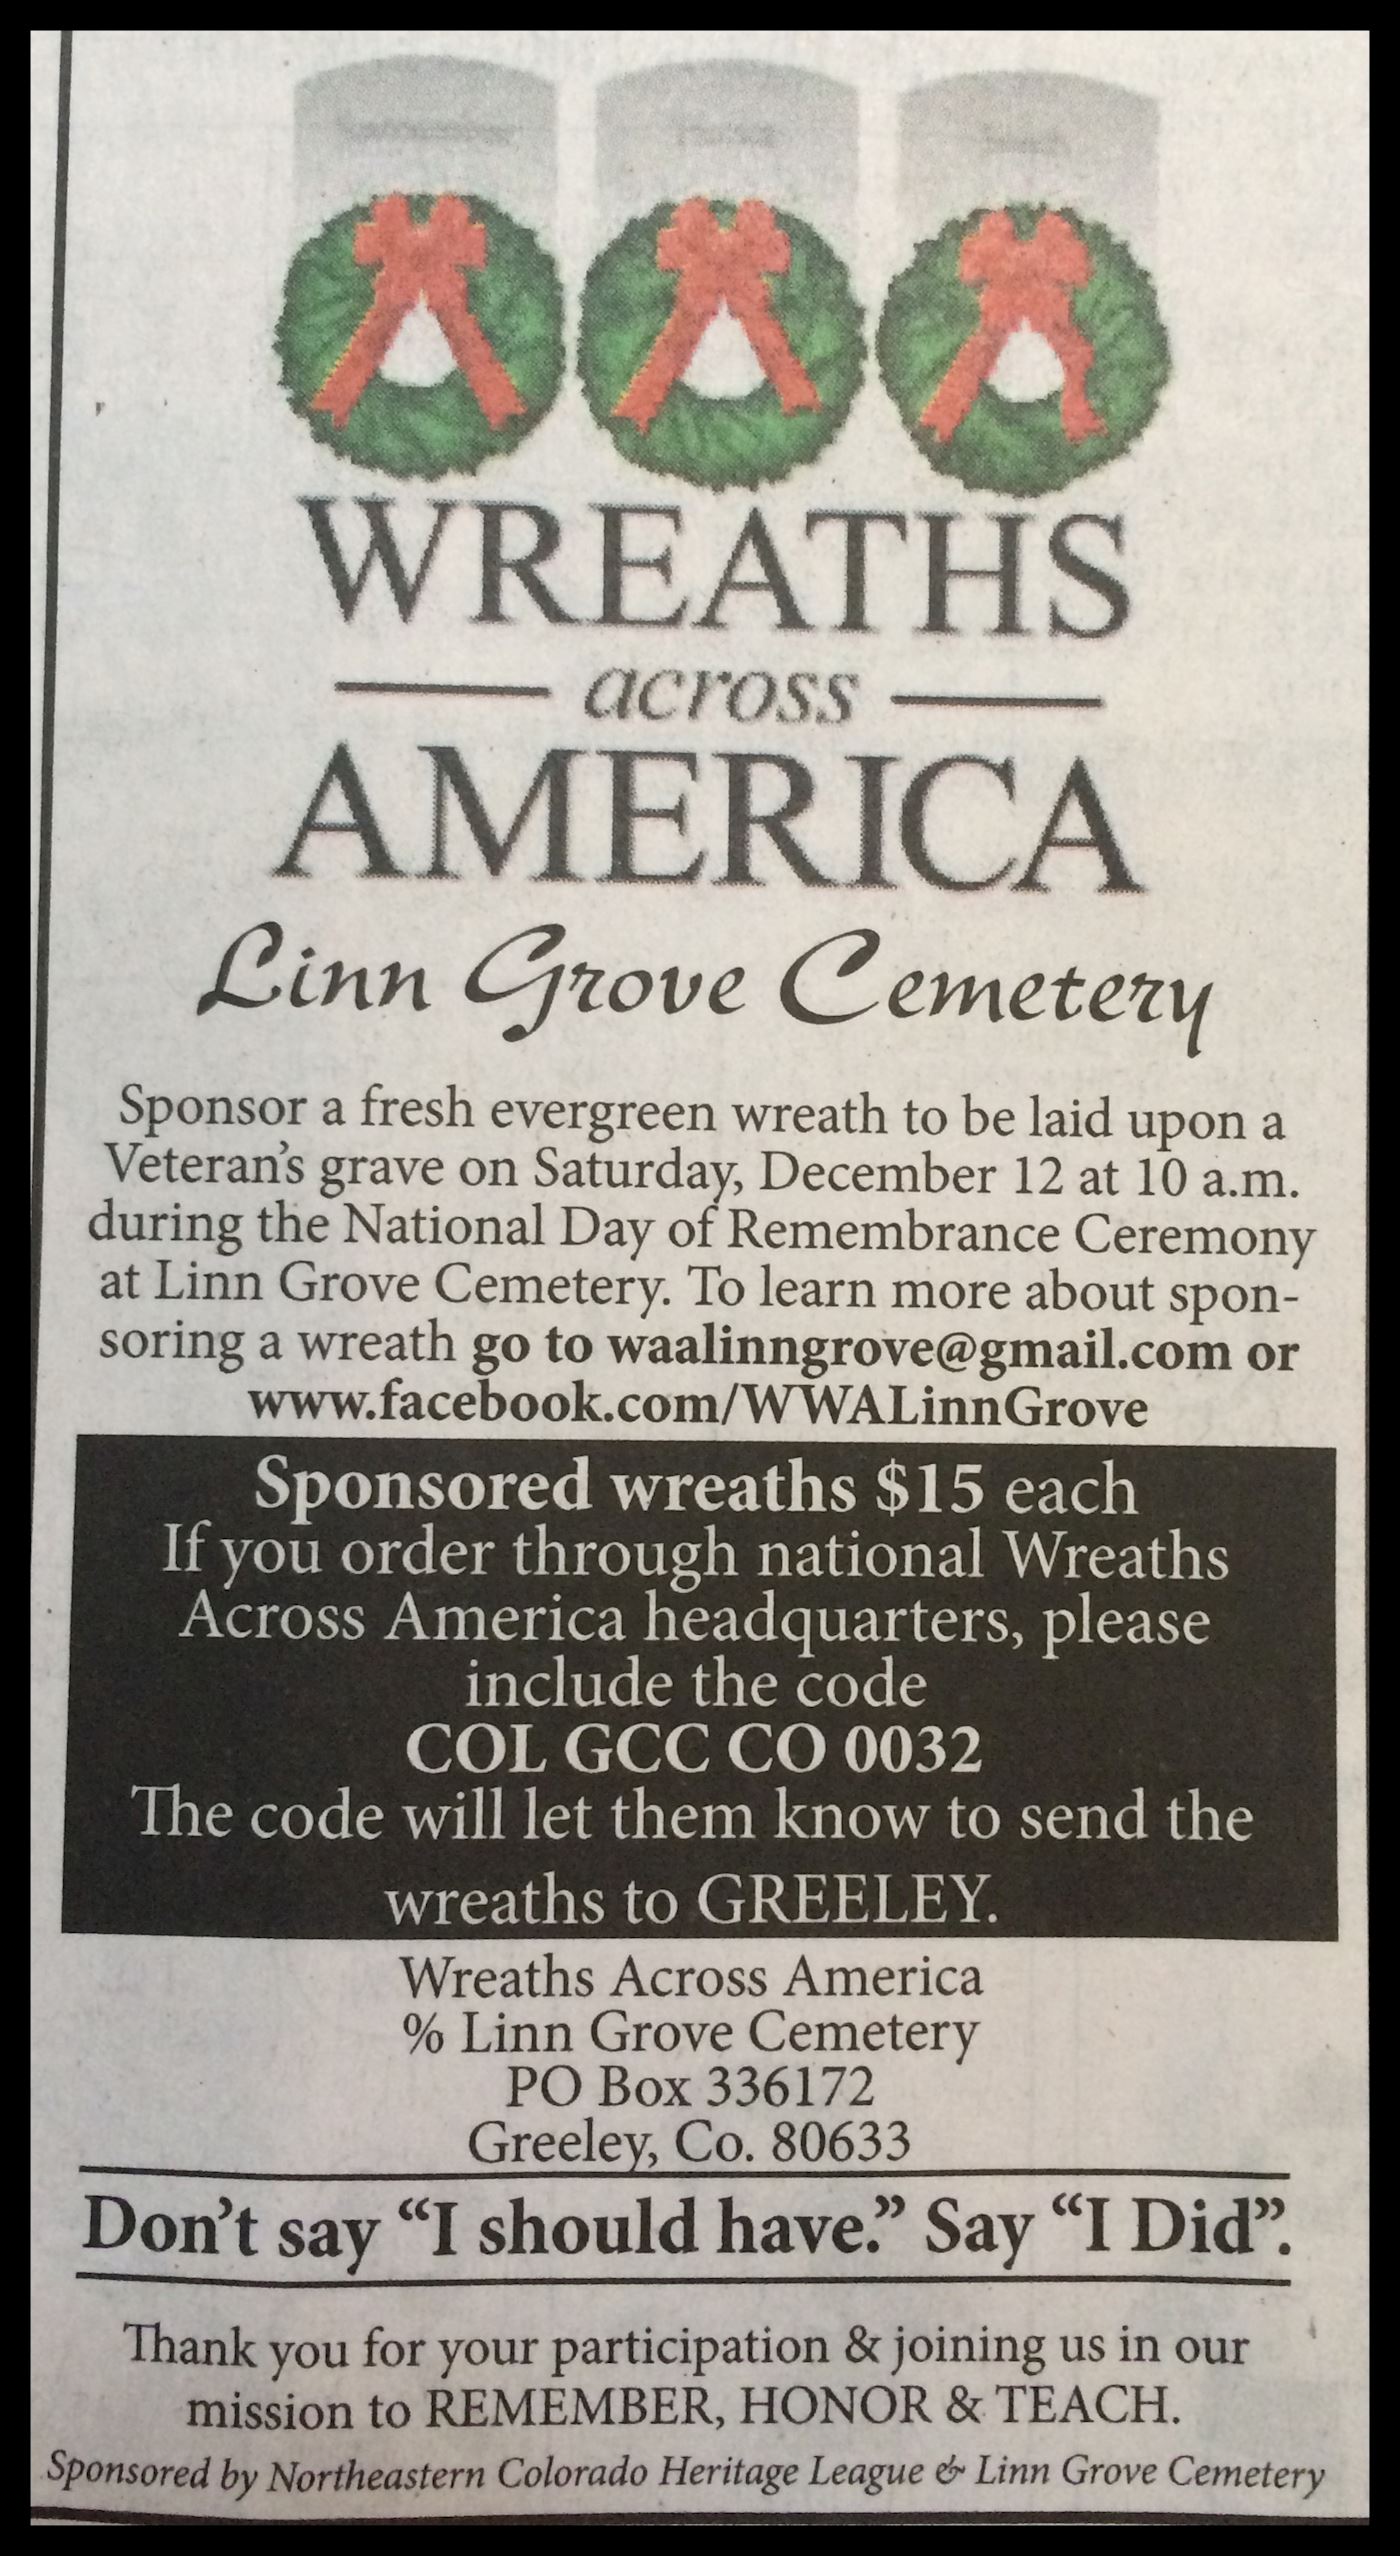 The Tribune of Greeley Colorado supporting Wreaths Across America at Linn Grove Cemetery since 2014